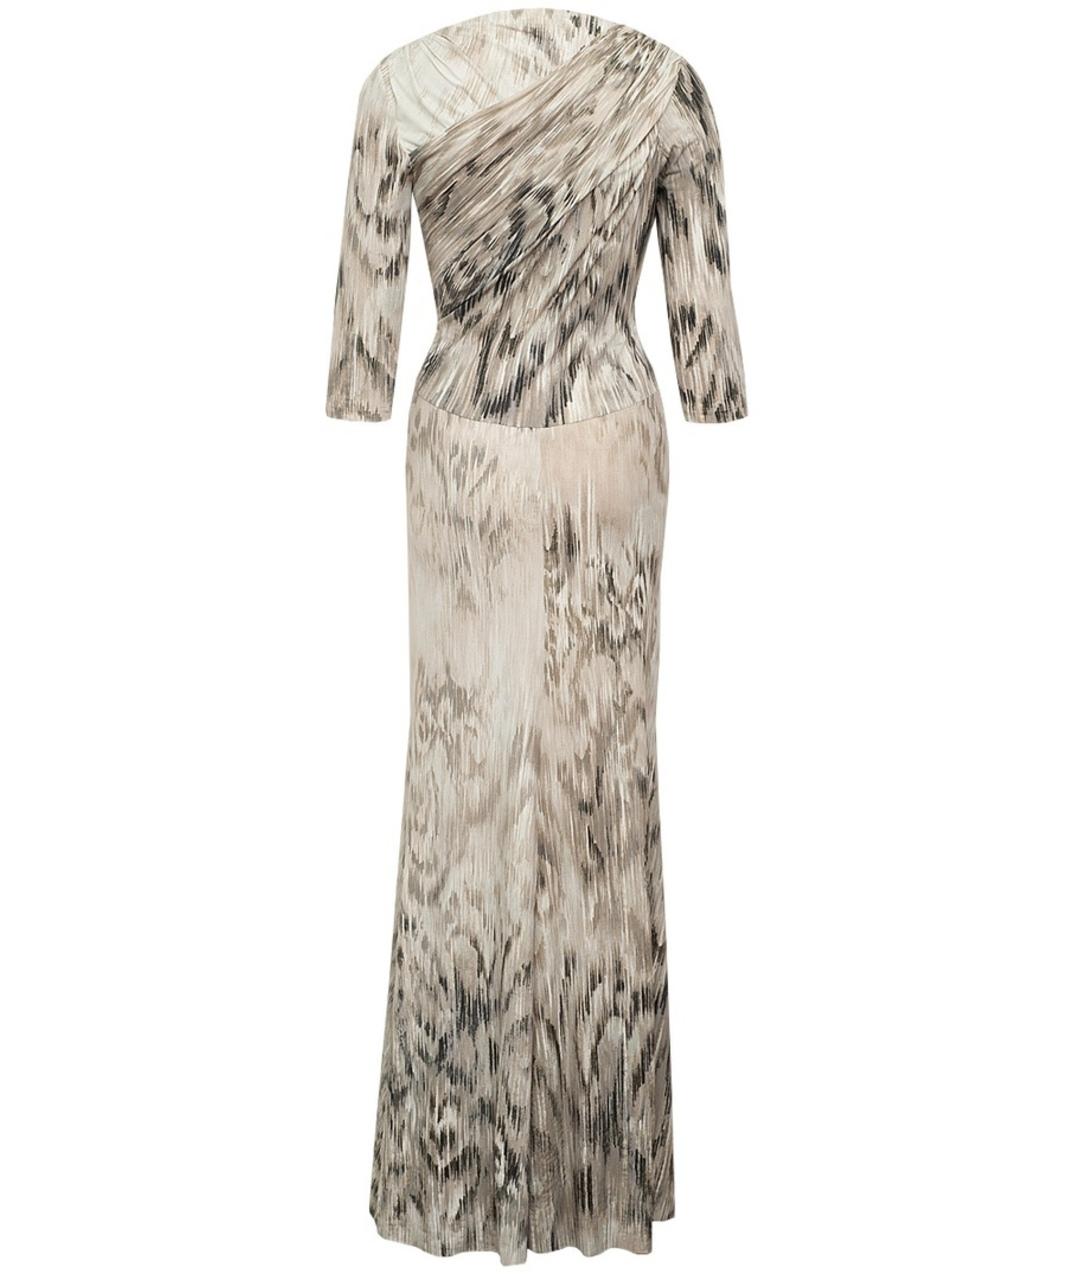 ROBERTO CAVALLI


This lovely dress comes from the house of Roberto Cavalli. 
Carry an animal-print and make for a striking ensemble.
V-neck, half sleeve and a fitted silhouette

Content: 88% polyamide, 12% elastane

size EU 40

Pre-owned, excellent